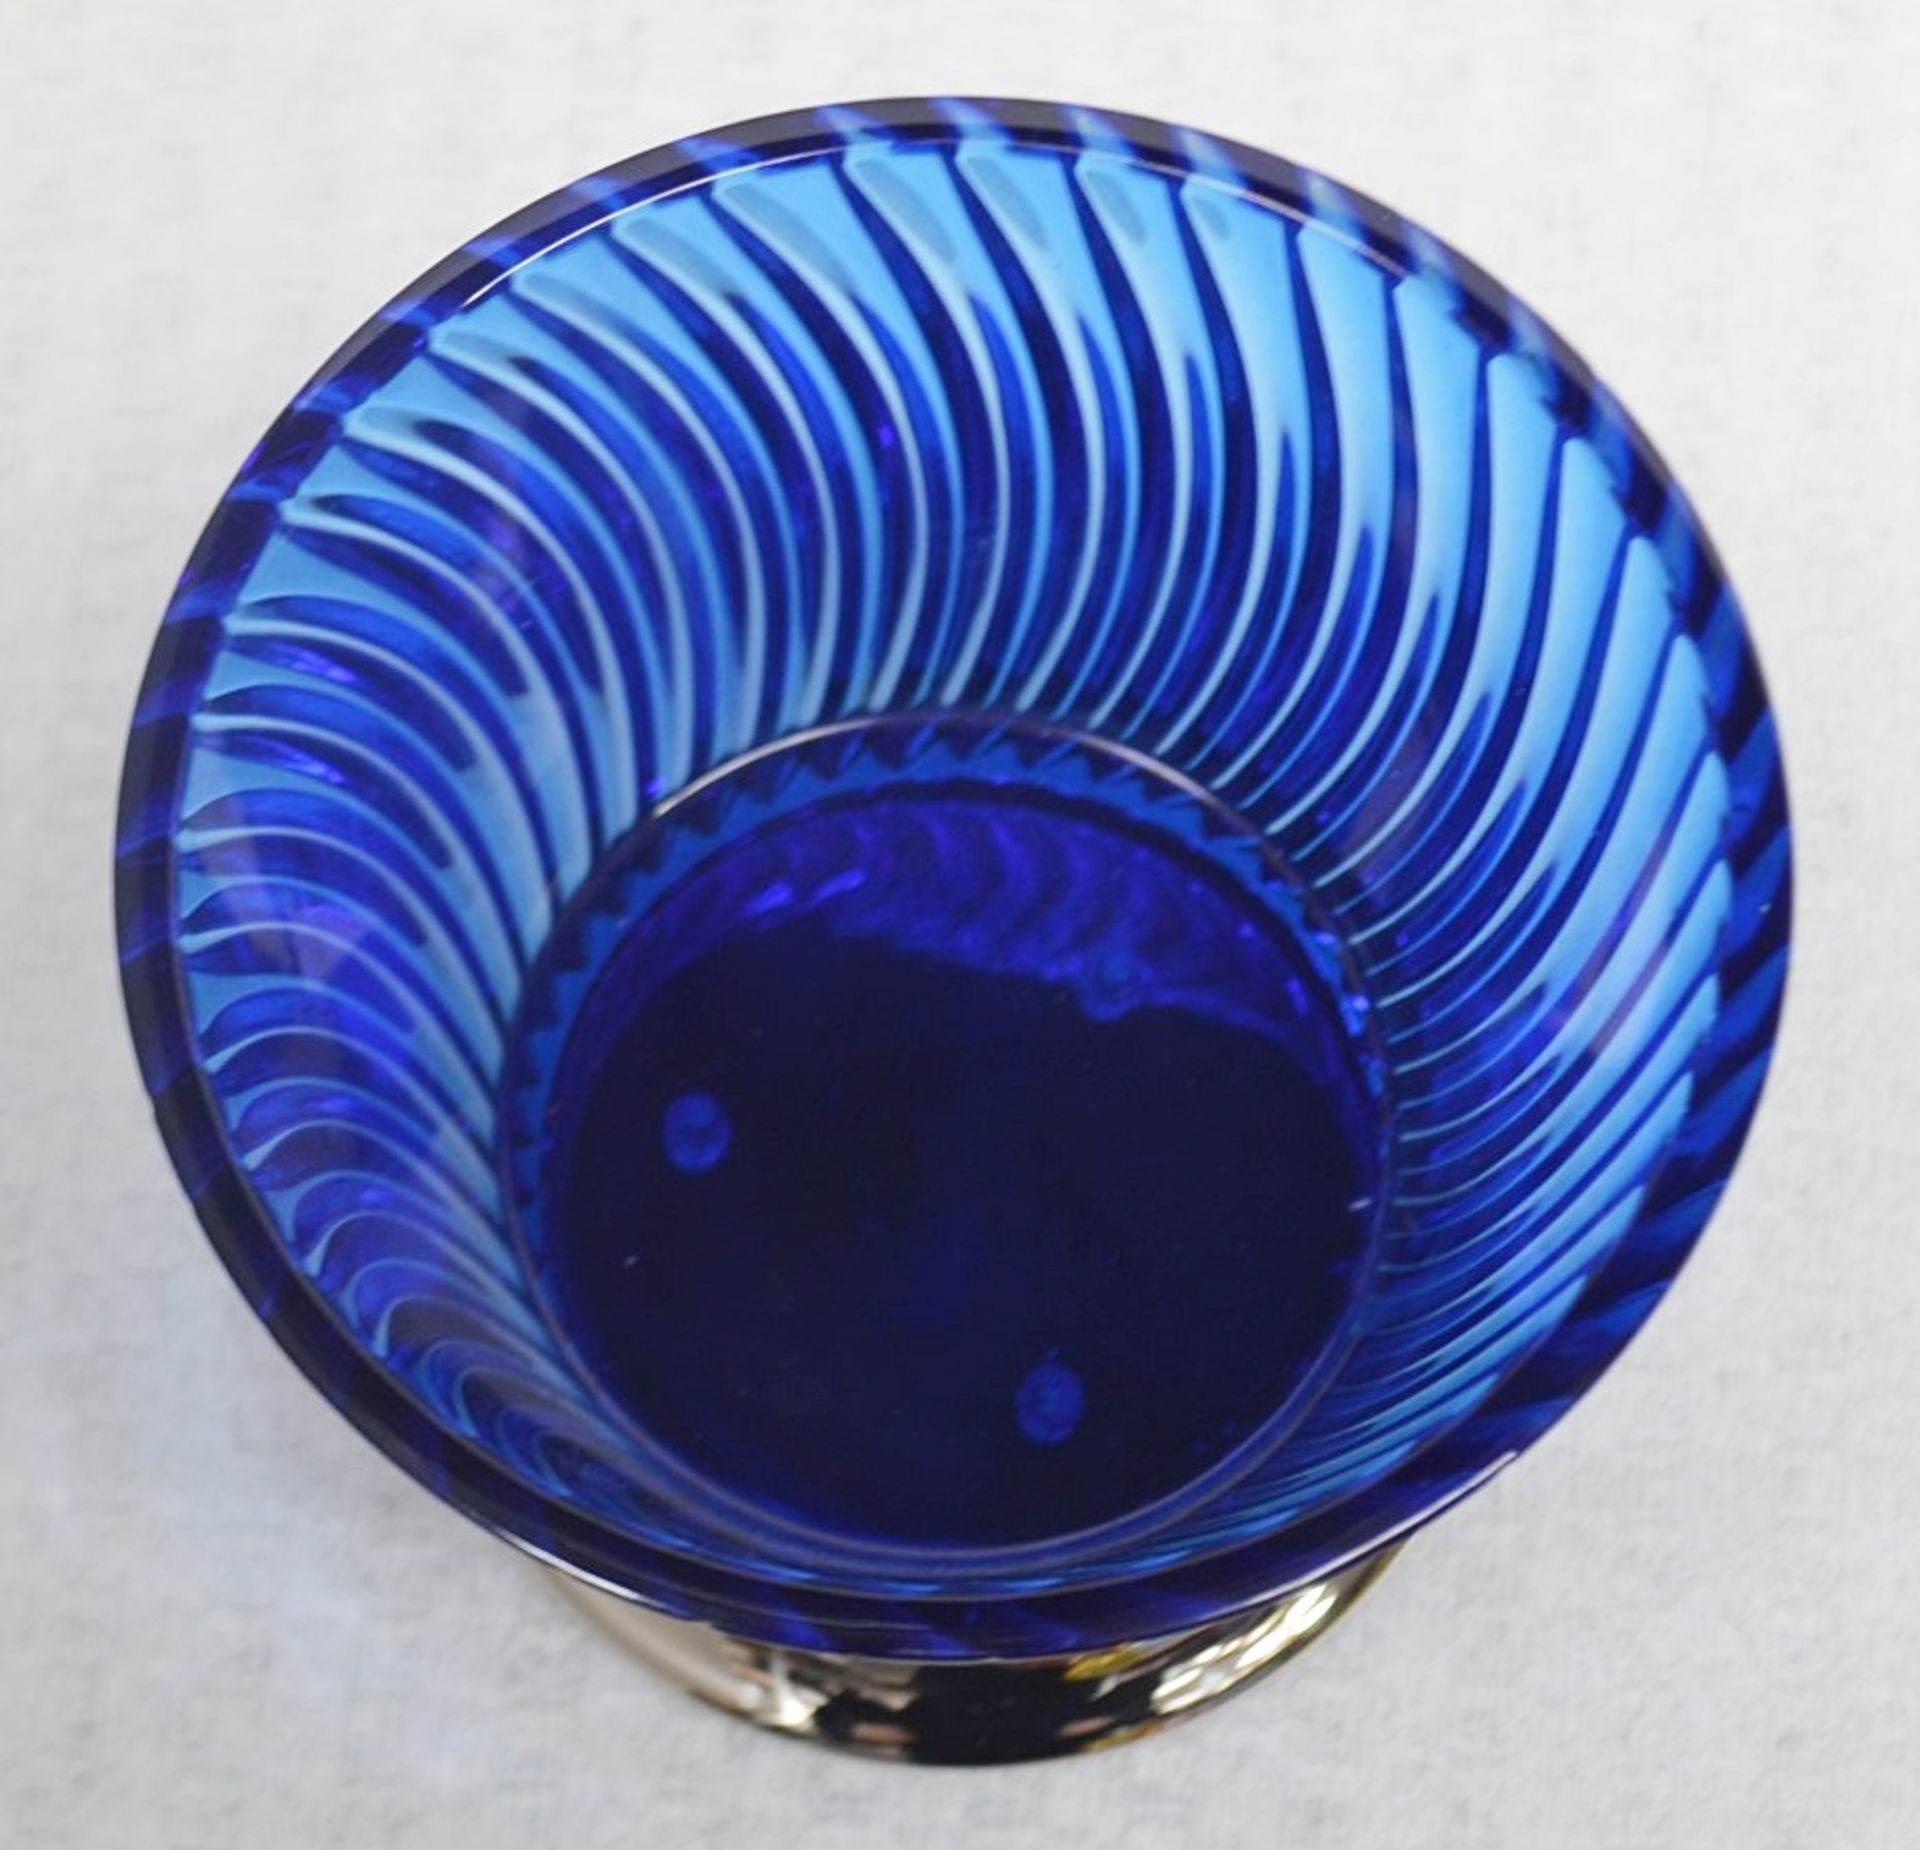 1 x BALDI 'Home Jewels' Italian Hand-crafted Artisan Crystal Marika Cup In Blue & Orange, With A - Image 3 of 4